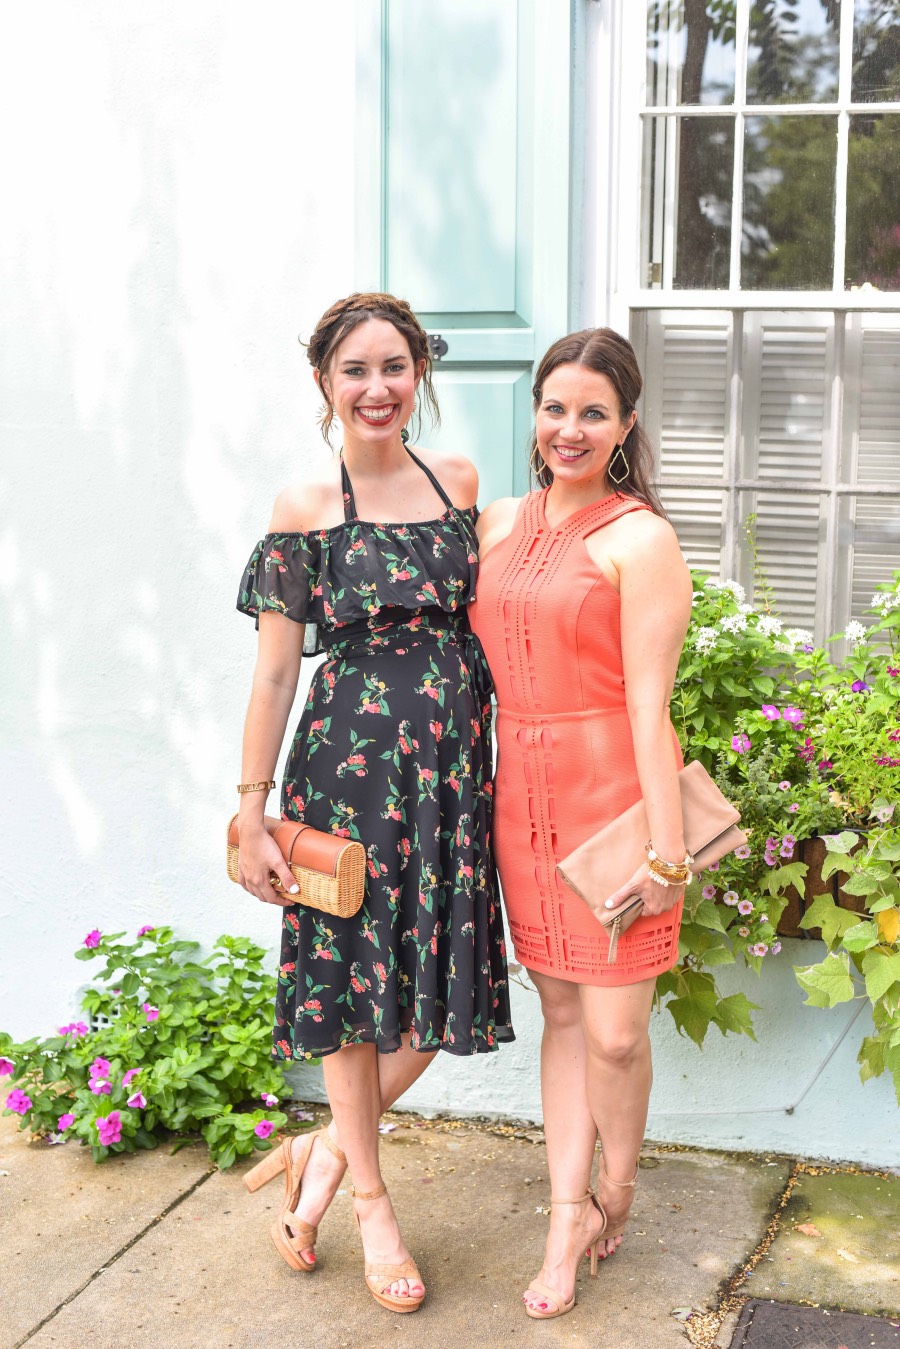 Alice Kerley and Karen Rock - Houston Fashion Bloggers at The Blog Societies in Charleston. 